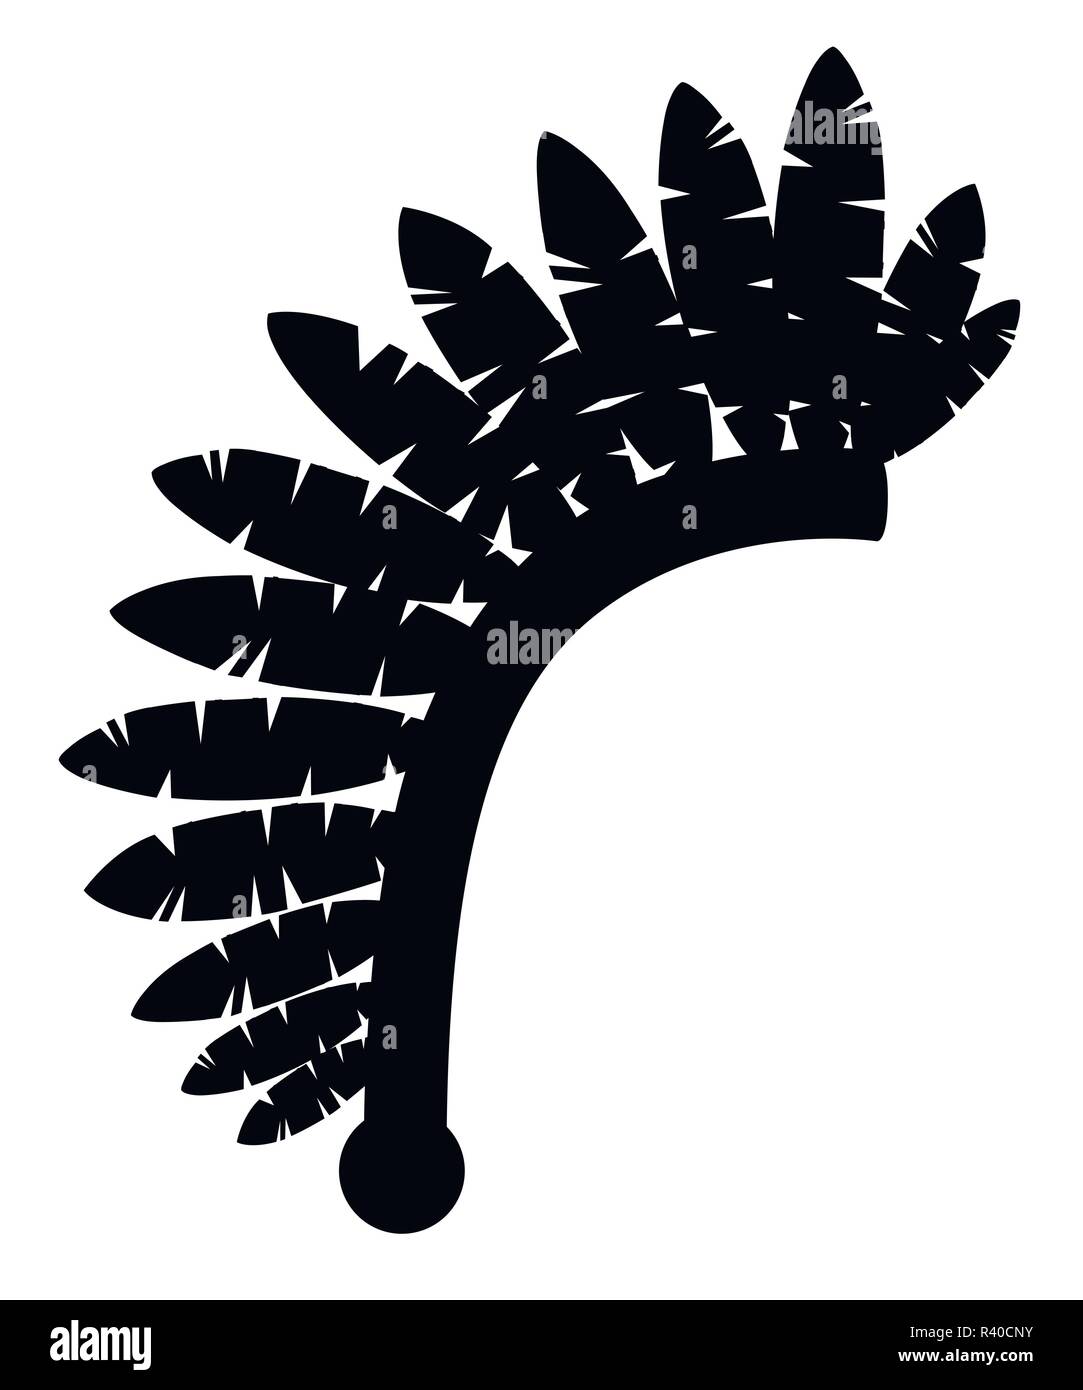 Black silhouette. Indian headdress. Warbonnet icon. Headdress with feathers. Flat vector illustration isolated on white background. Stock Vector